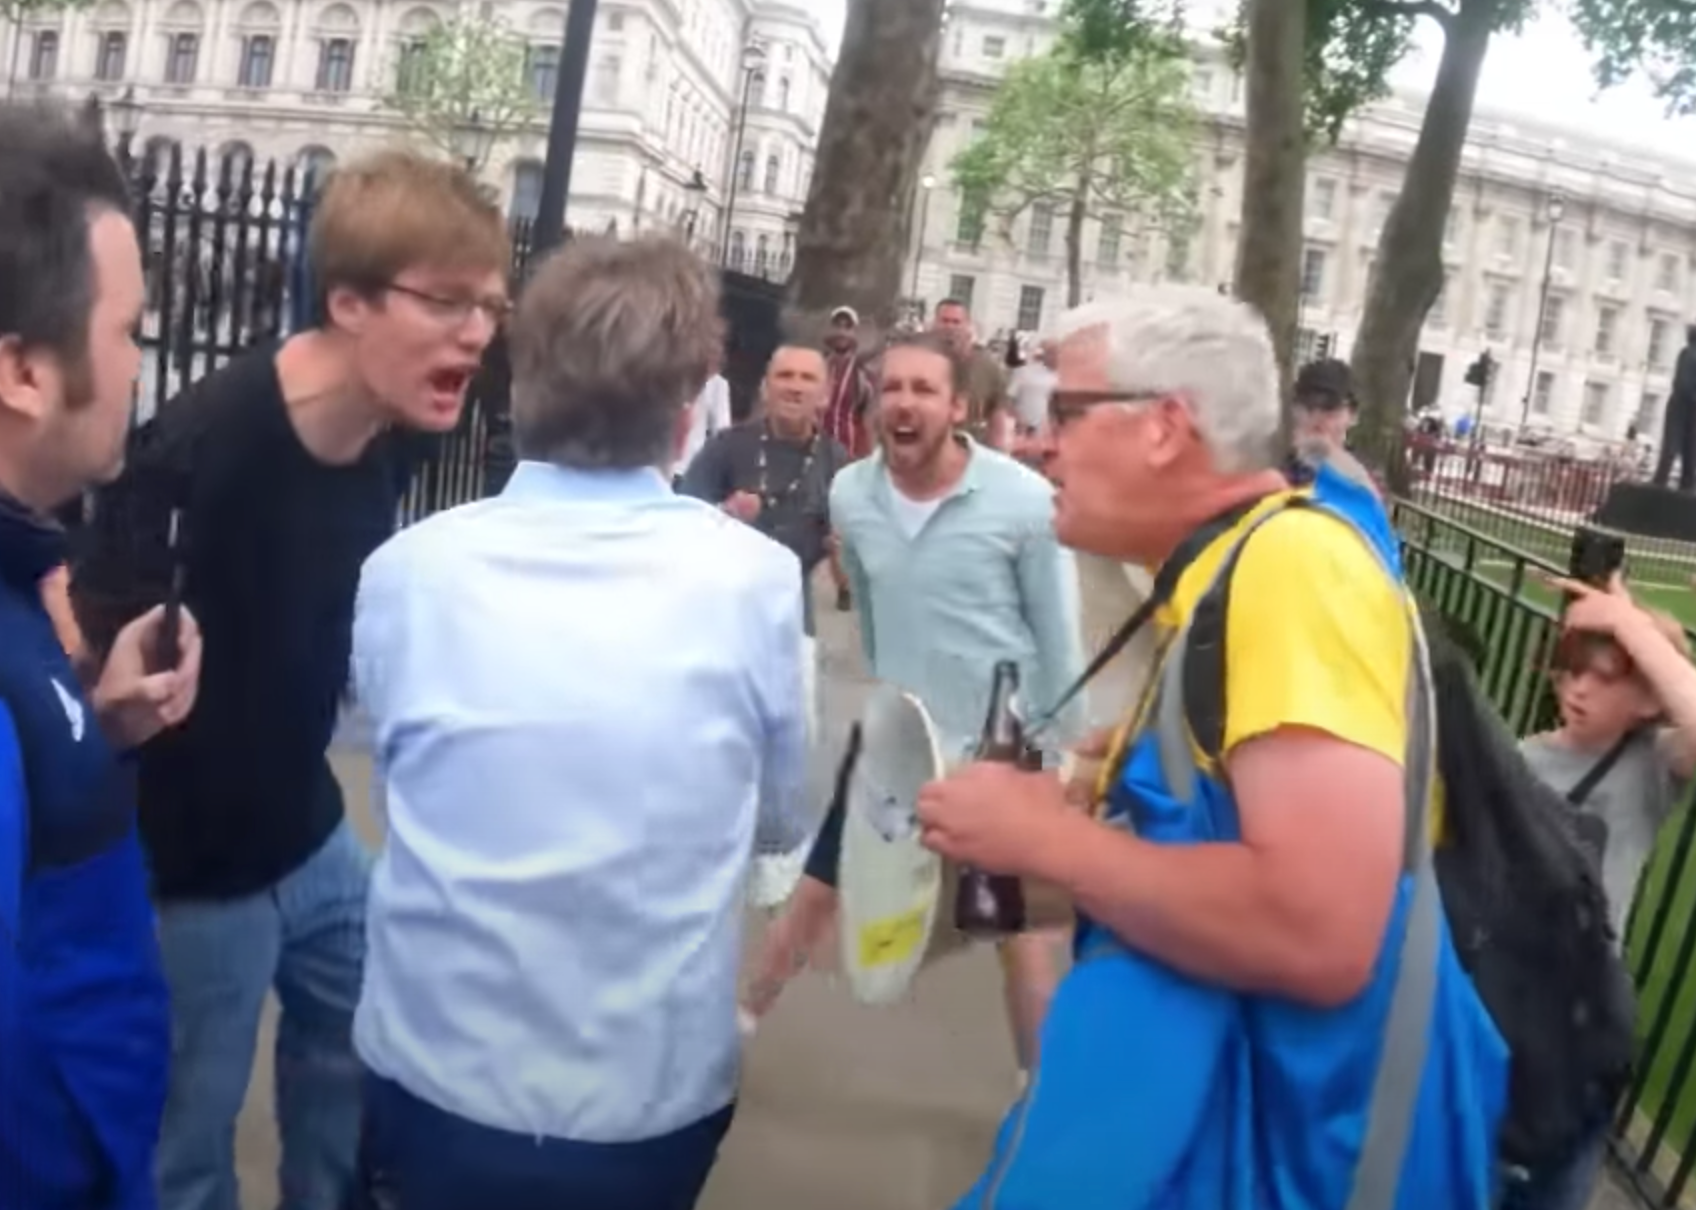 Newsnight’s Nick Watt was chased down the street by anti-lockdown protesters